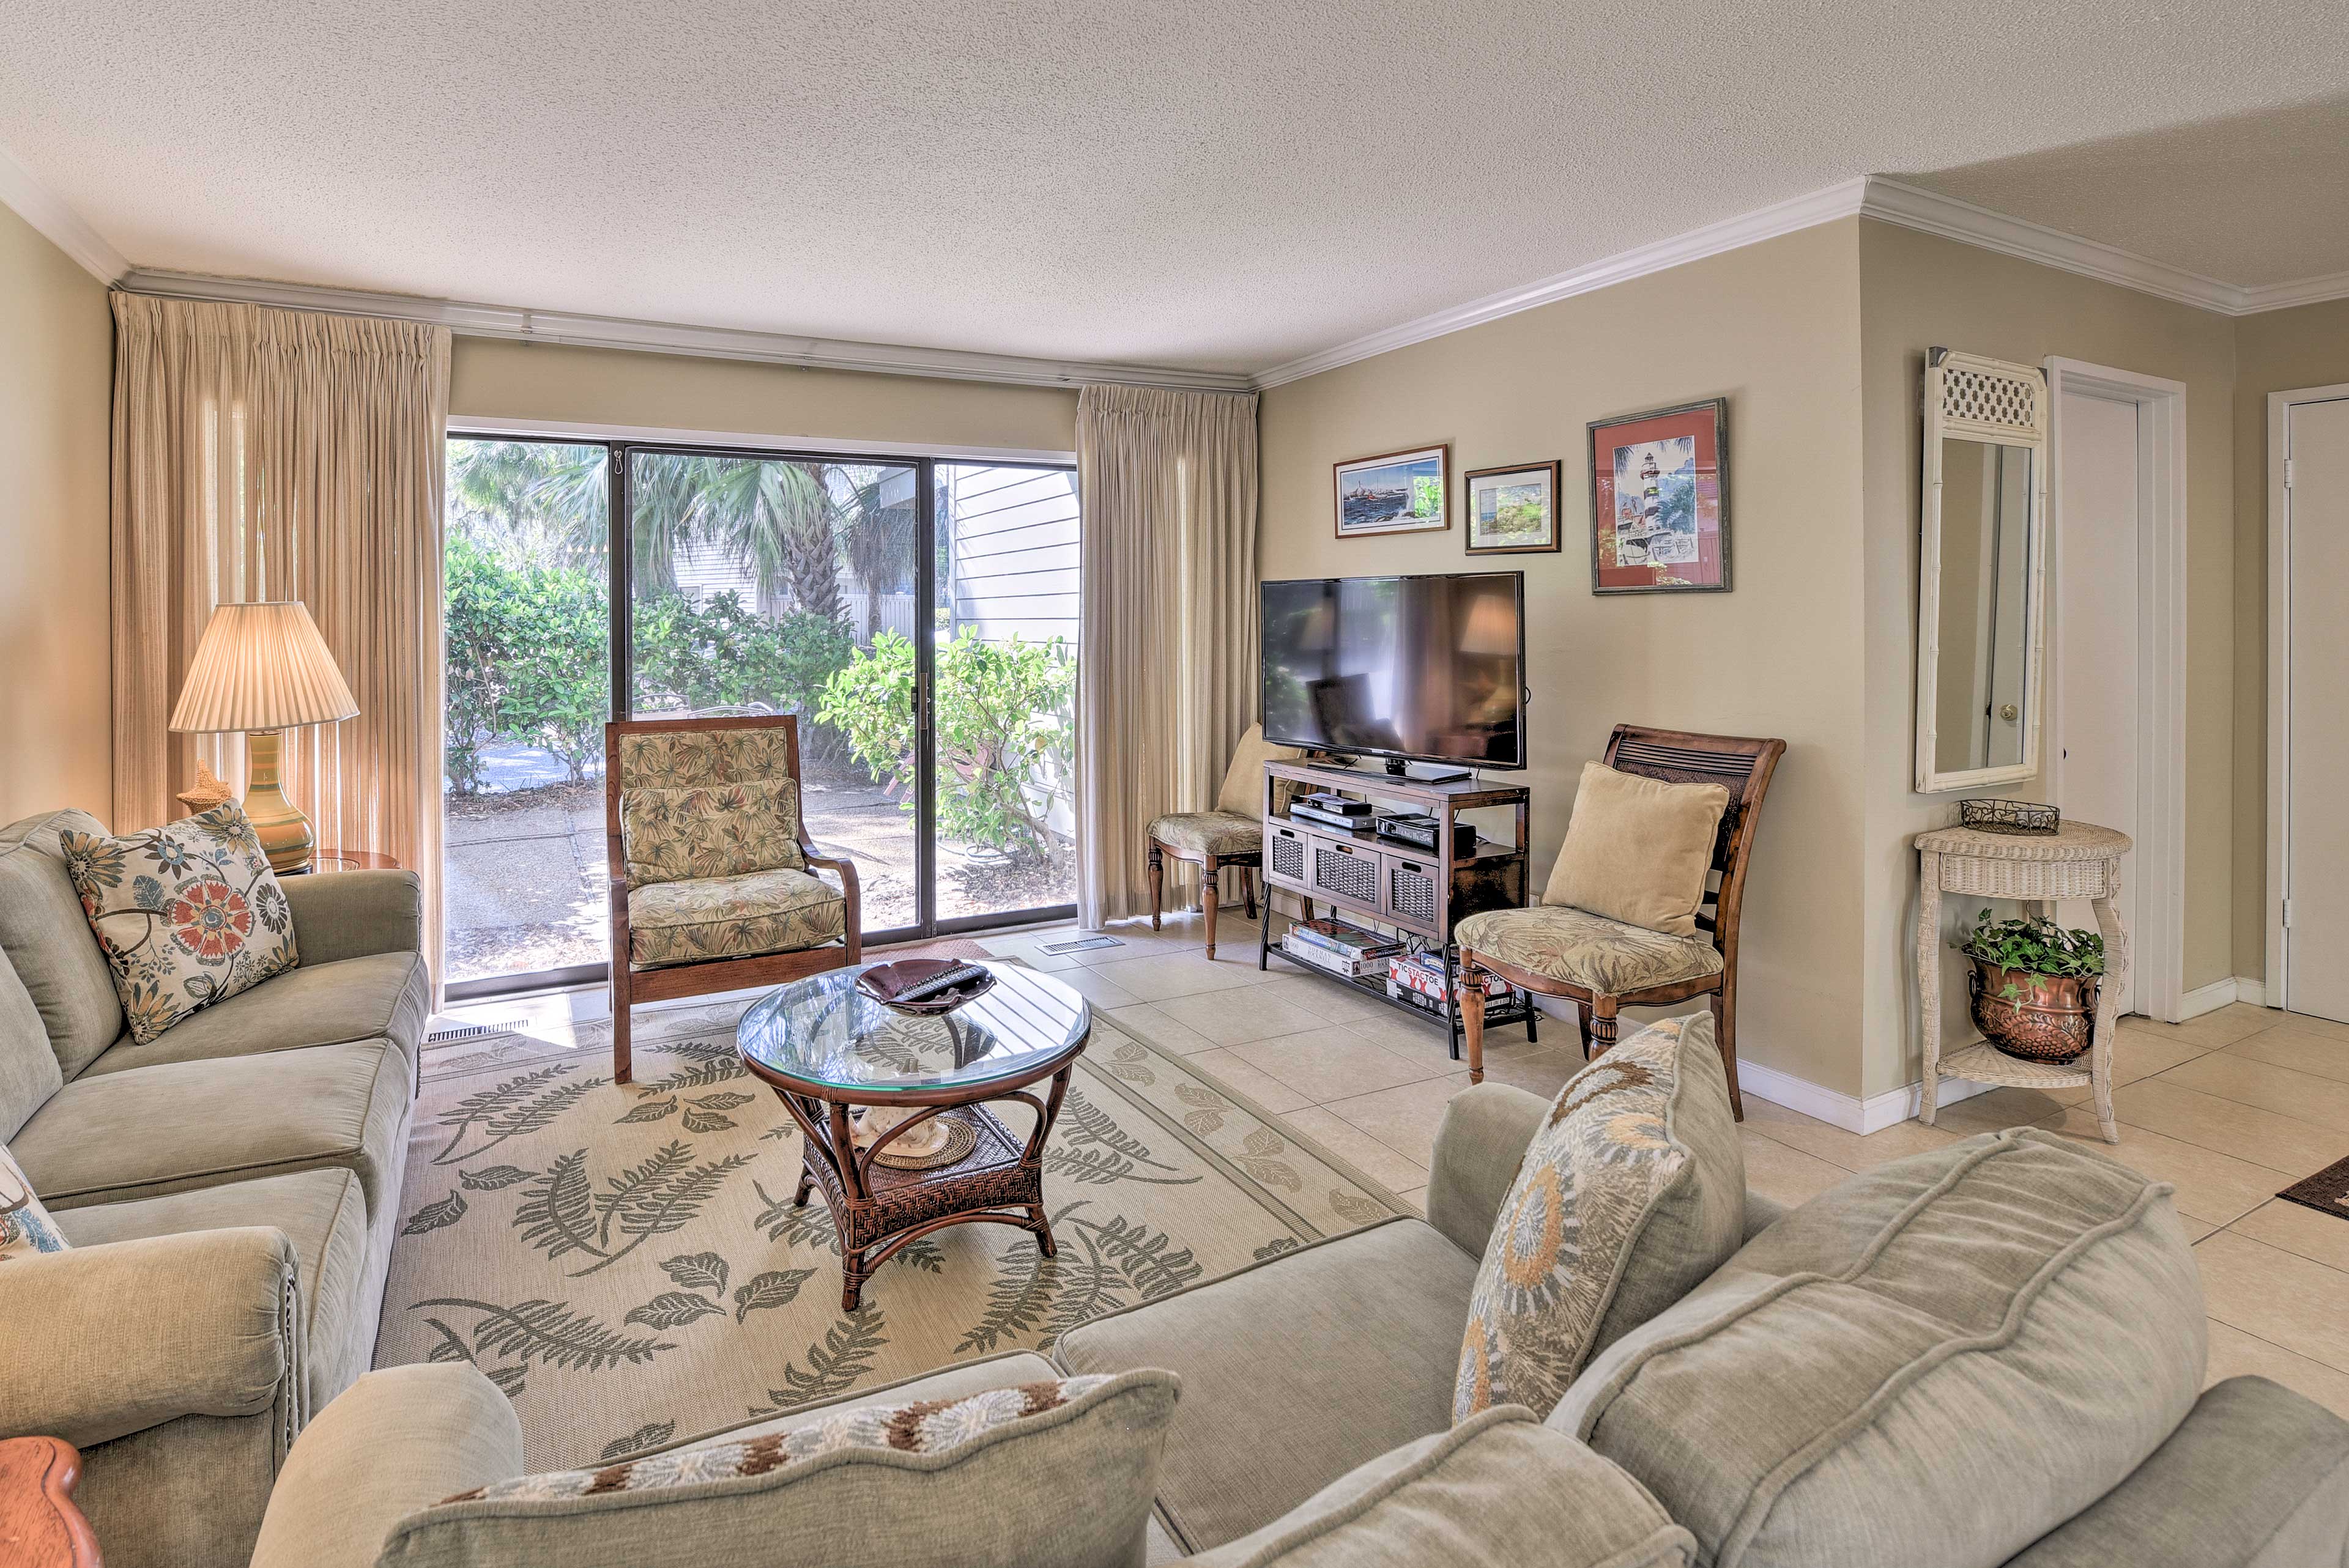 Your Hilton Head holiday awaits you at this 3-bedroom, 3-bath vacation rental.